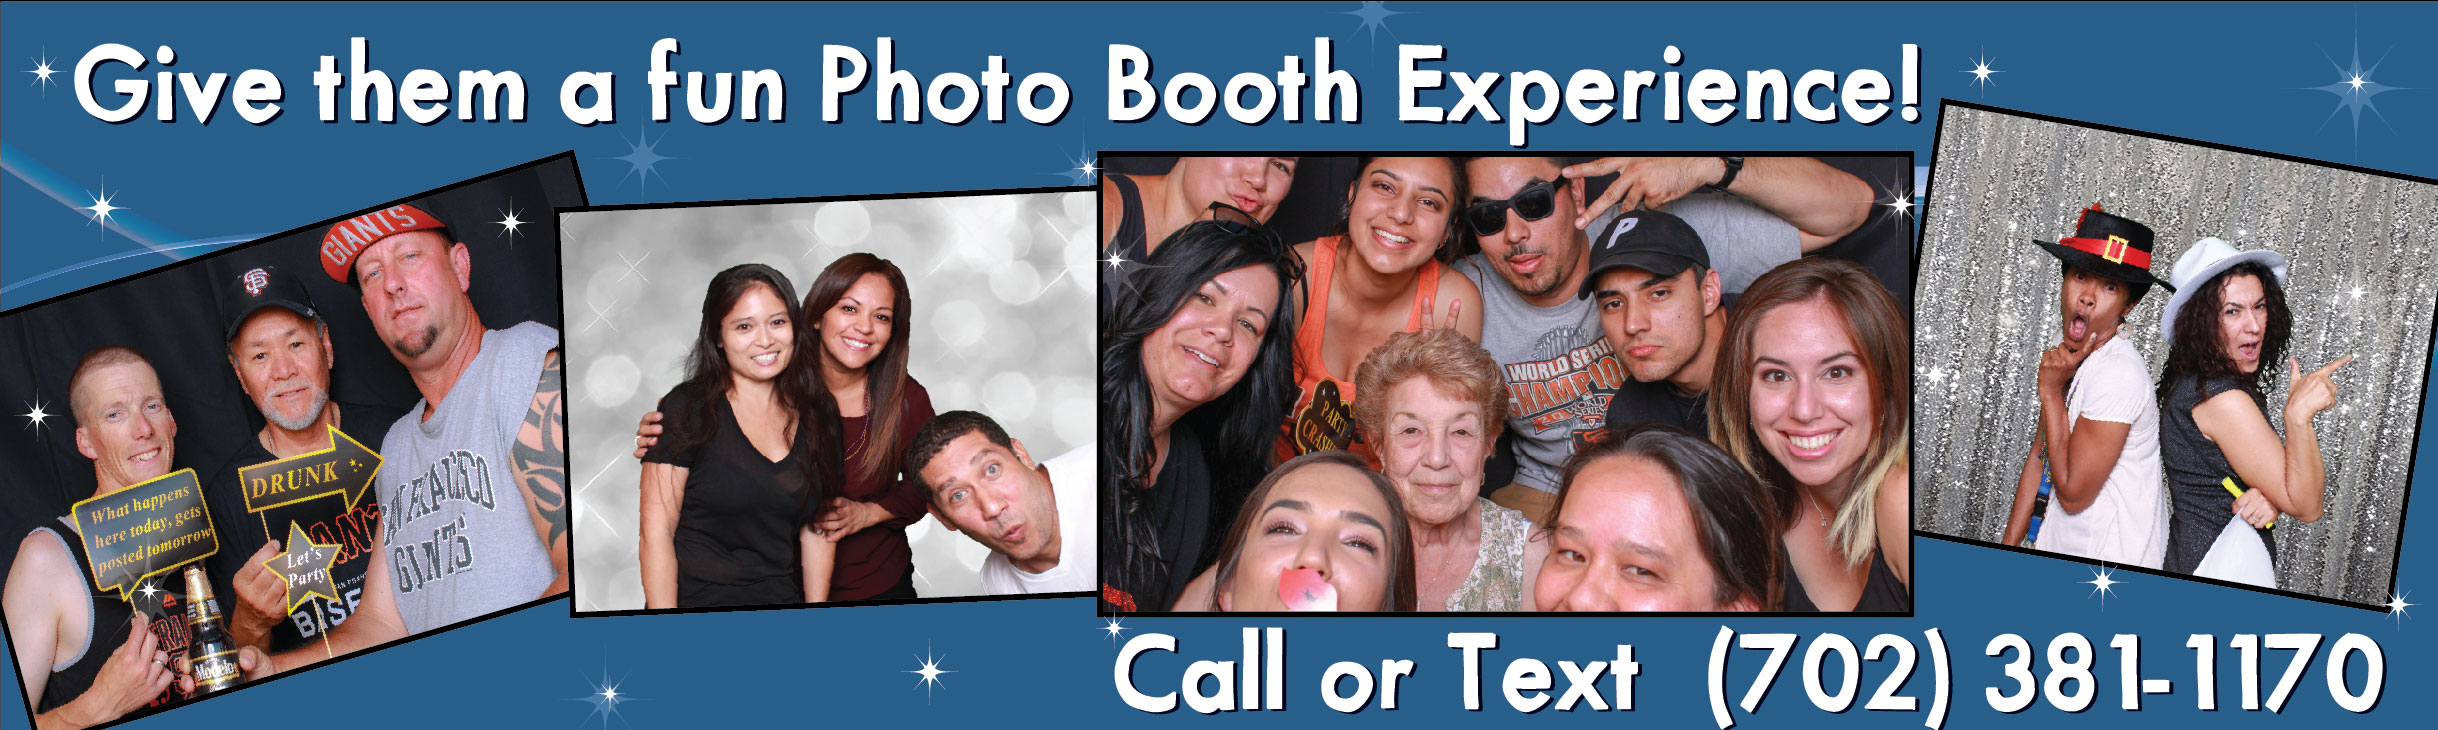 Give them a fun photo booth experience!